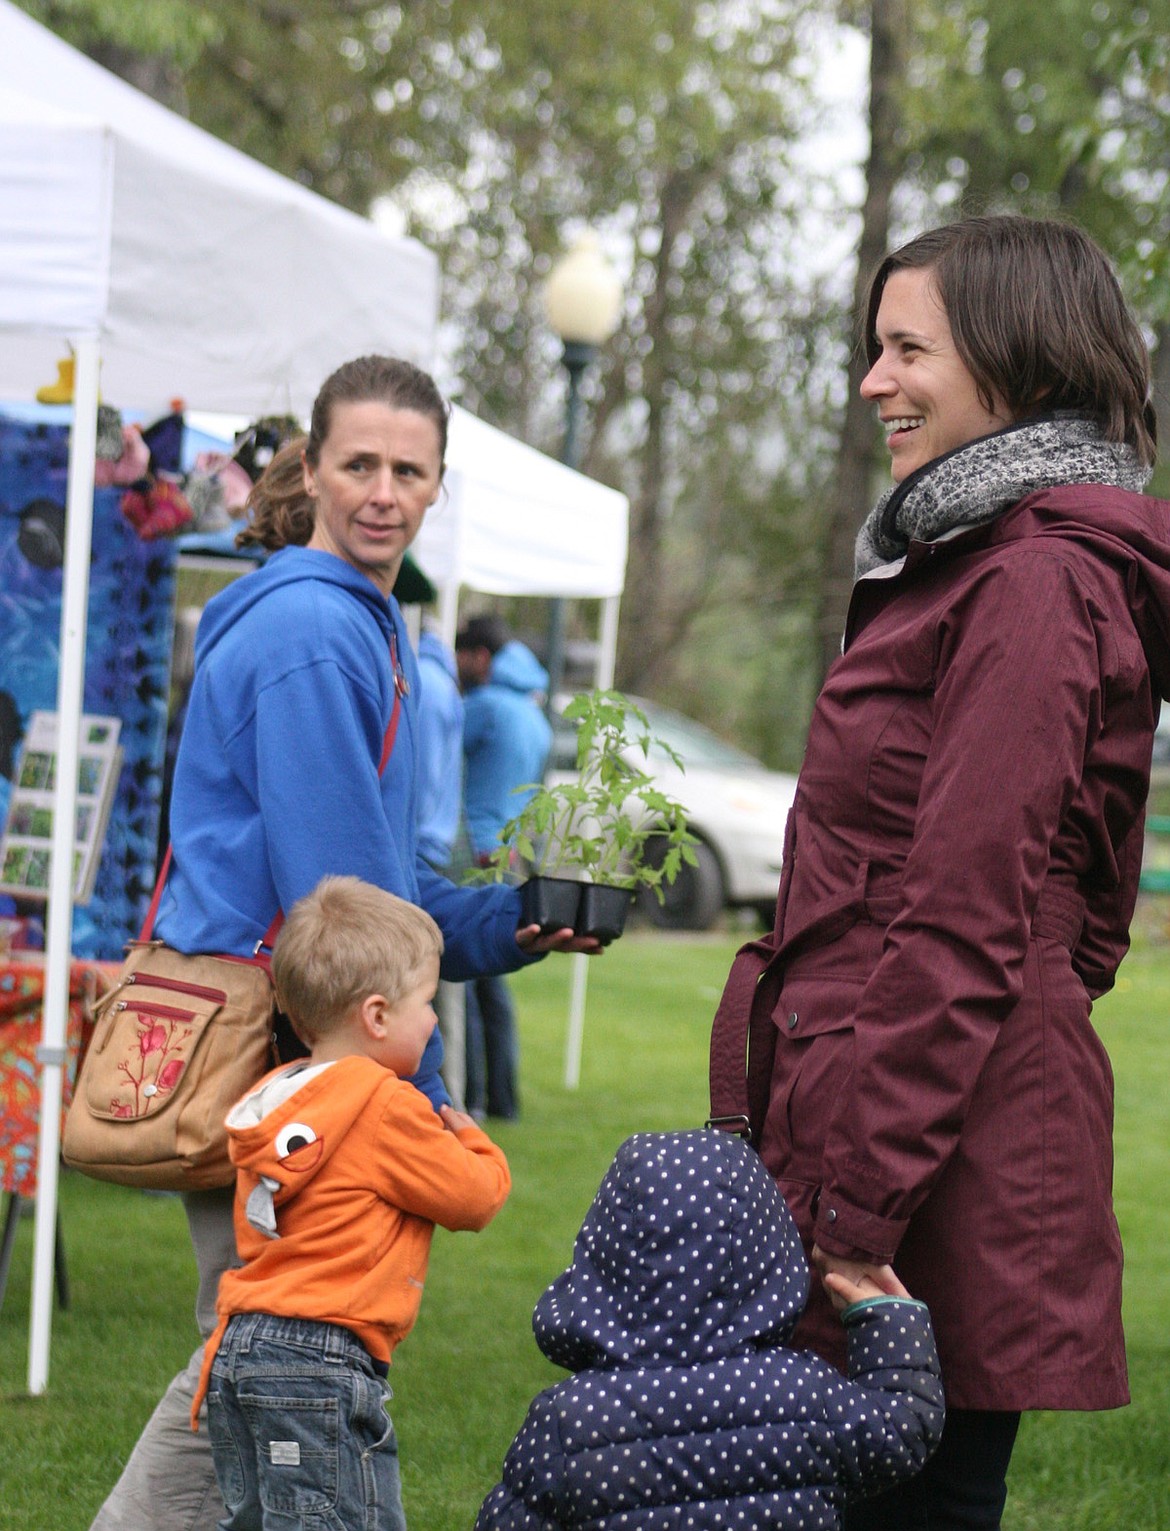 Troy Farmers Market manager Shawna Kelsey, foreground, holding Calliope Karuzas&#146; hand, and customer Shana Bernall, background, with son Glade Bernall.